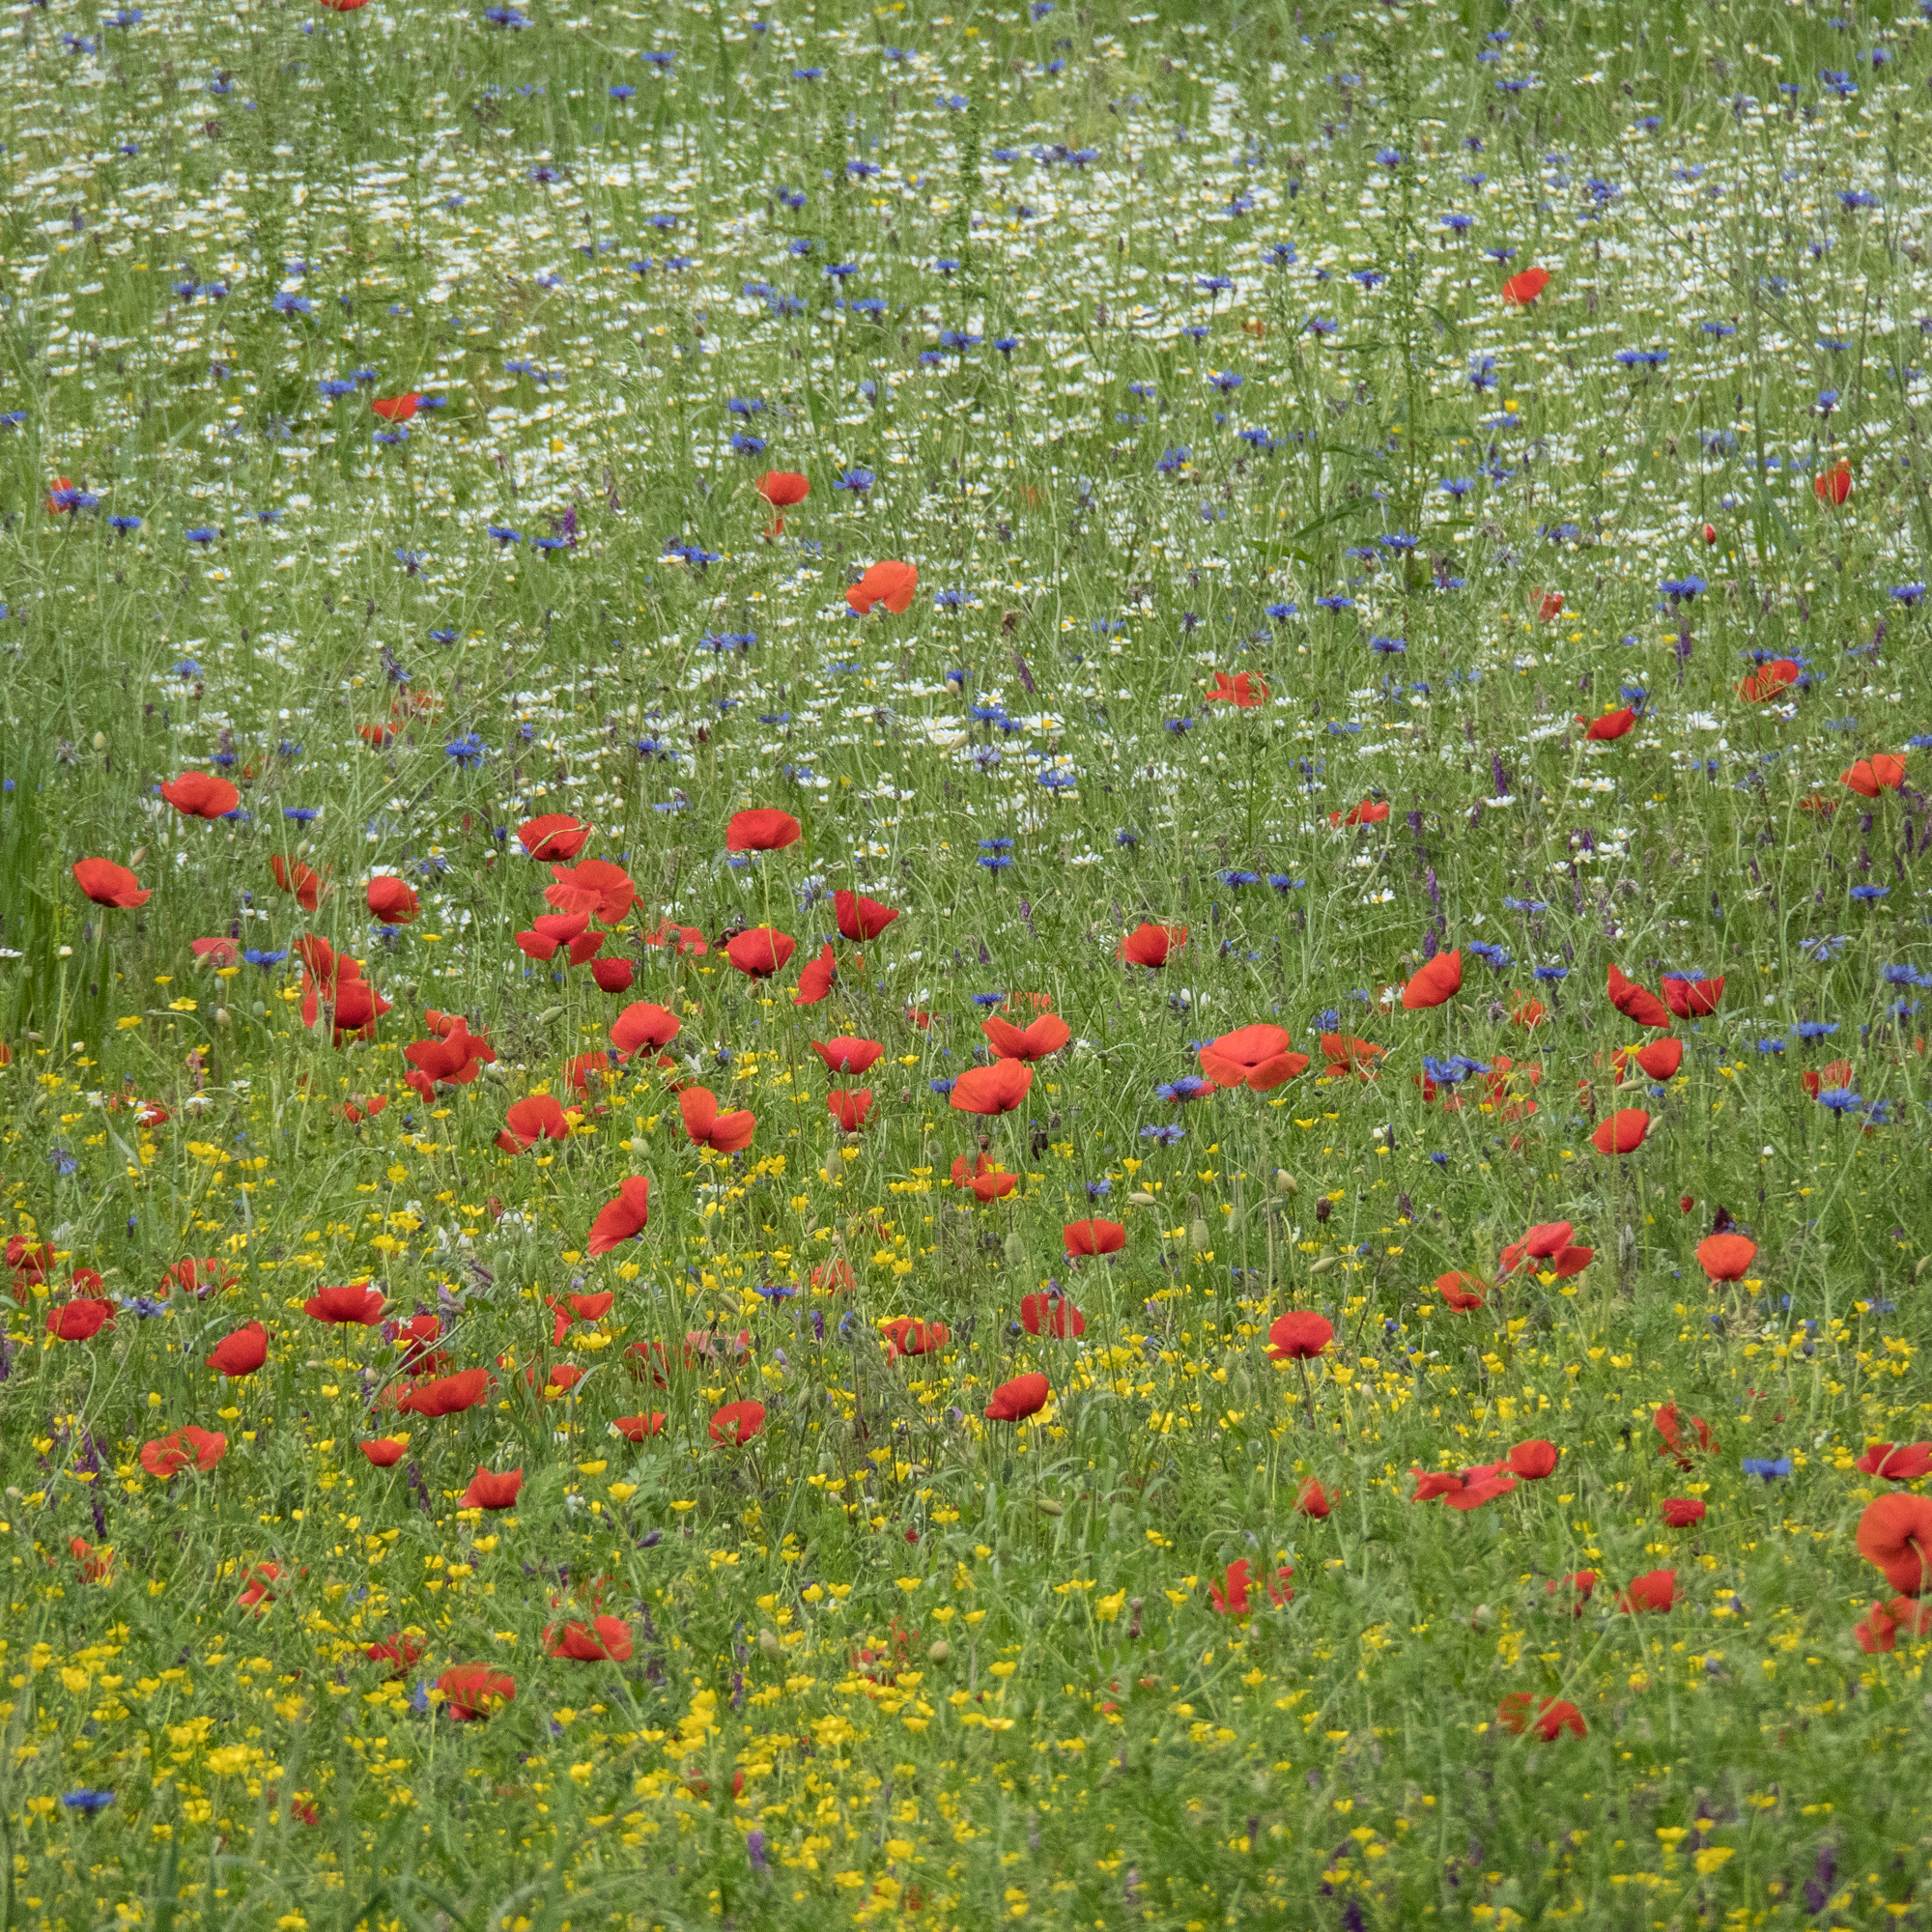 poppies and wildflowers